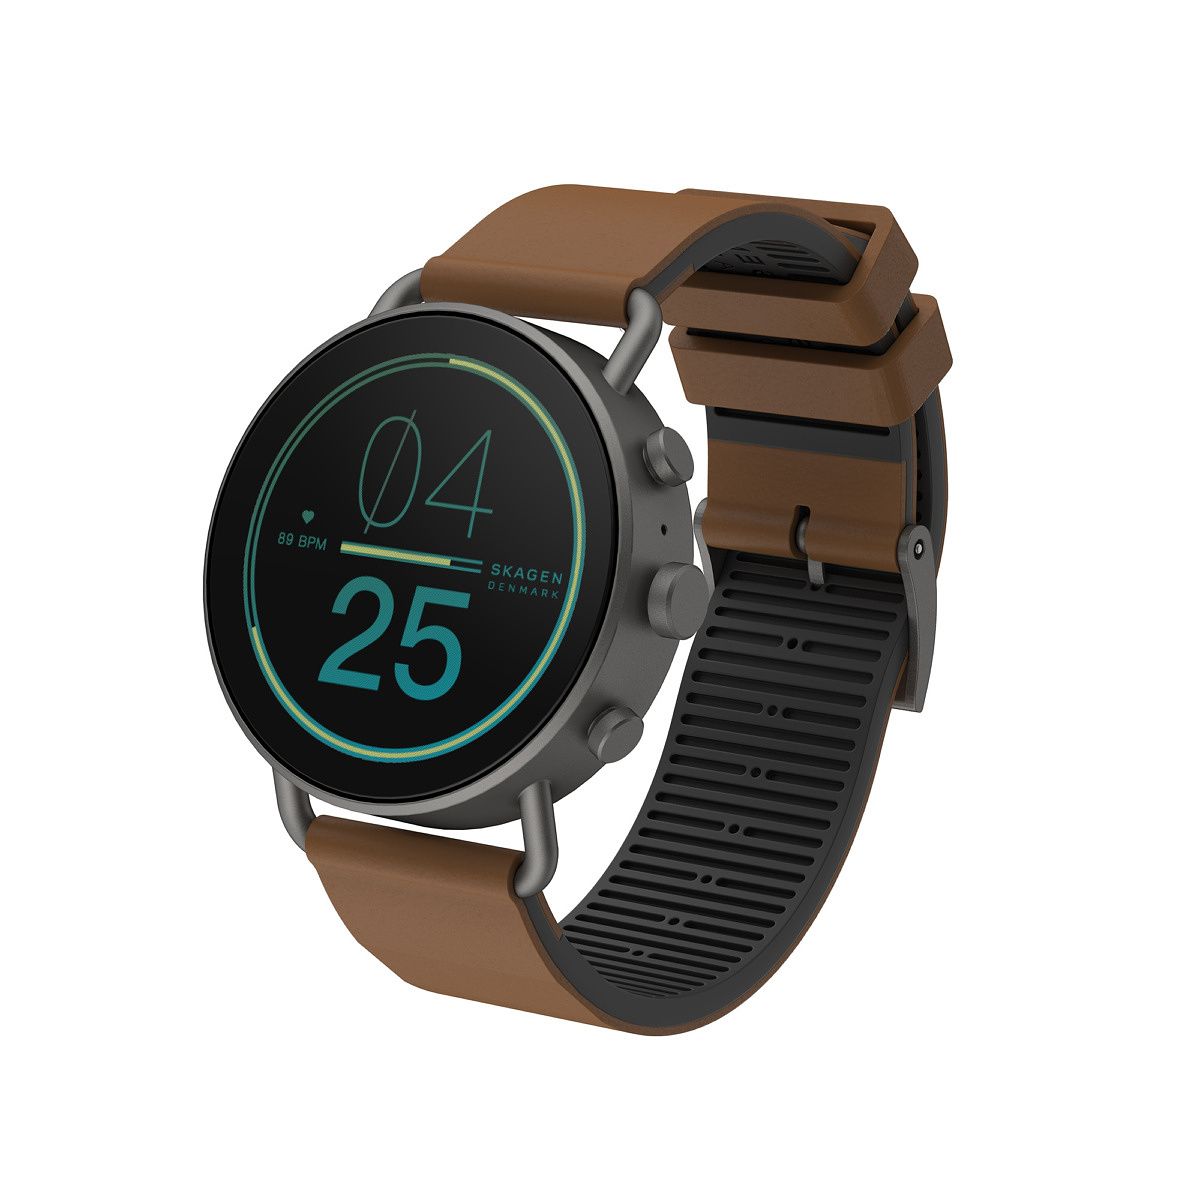 Fossil's newest smartwatch released under its Skagen branding, this is a clean and minimal-looking Wear OS watch that, despite outdated software, still does smartwatchy things quite well. 